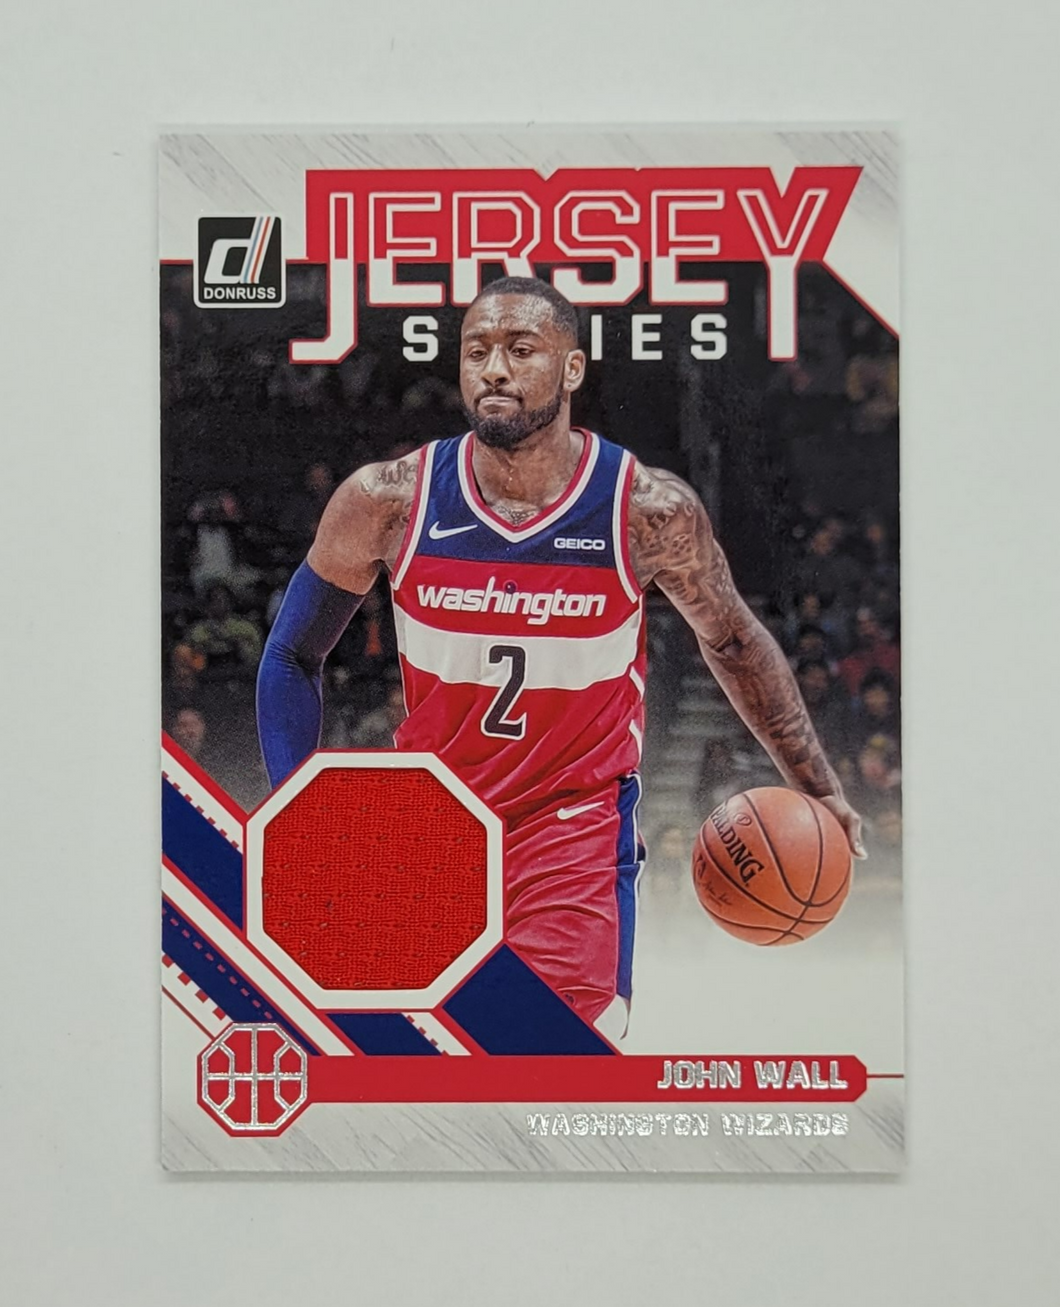 2020-2021 Donruss Jersey Series John Wall Game Used Material Patch Basketball Card